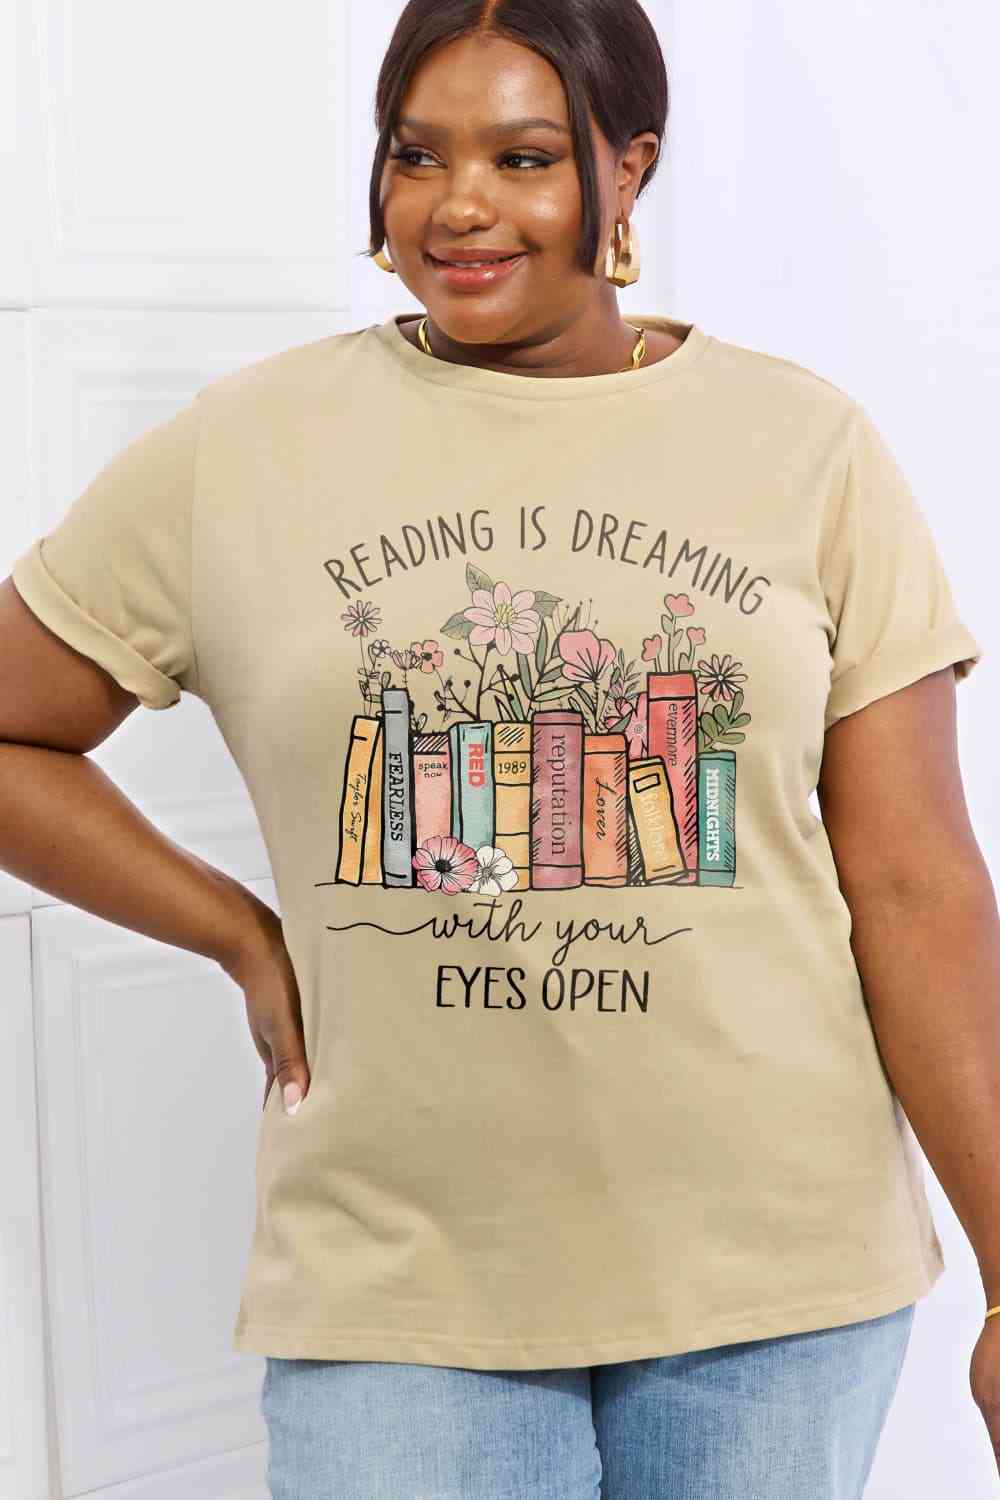 READING IS DREAMING WITH YOUR EYES OPEN Graphic Cotton Tee - T-Shirts - Shirts & Tops - 5 - 2024